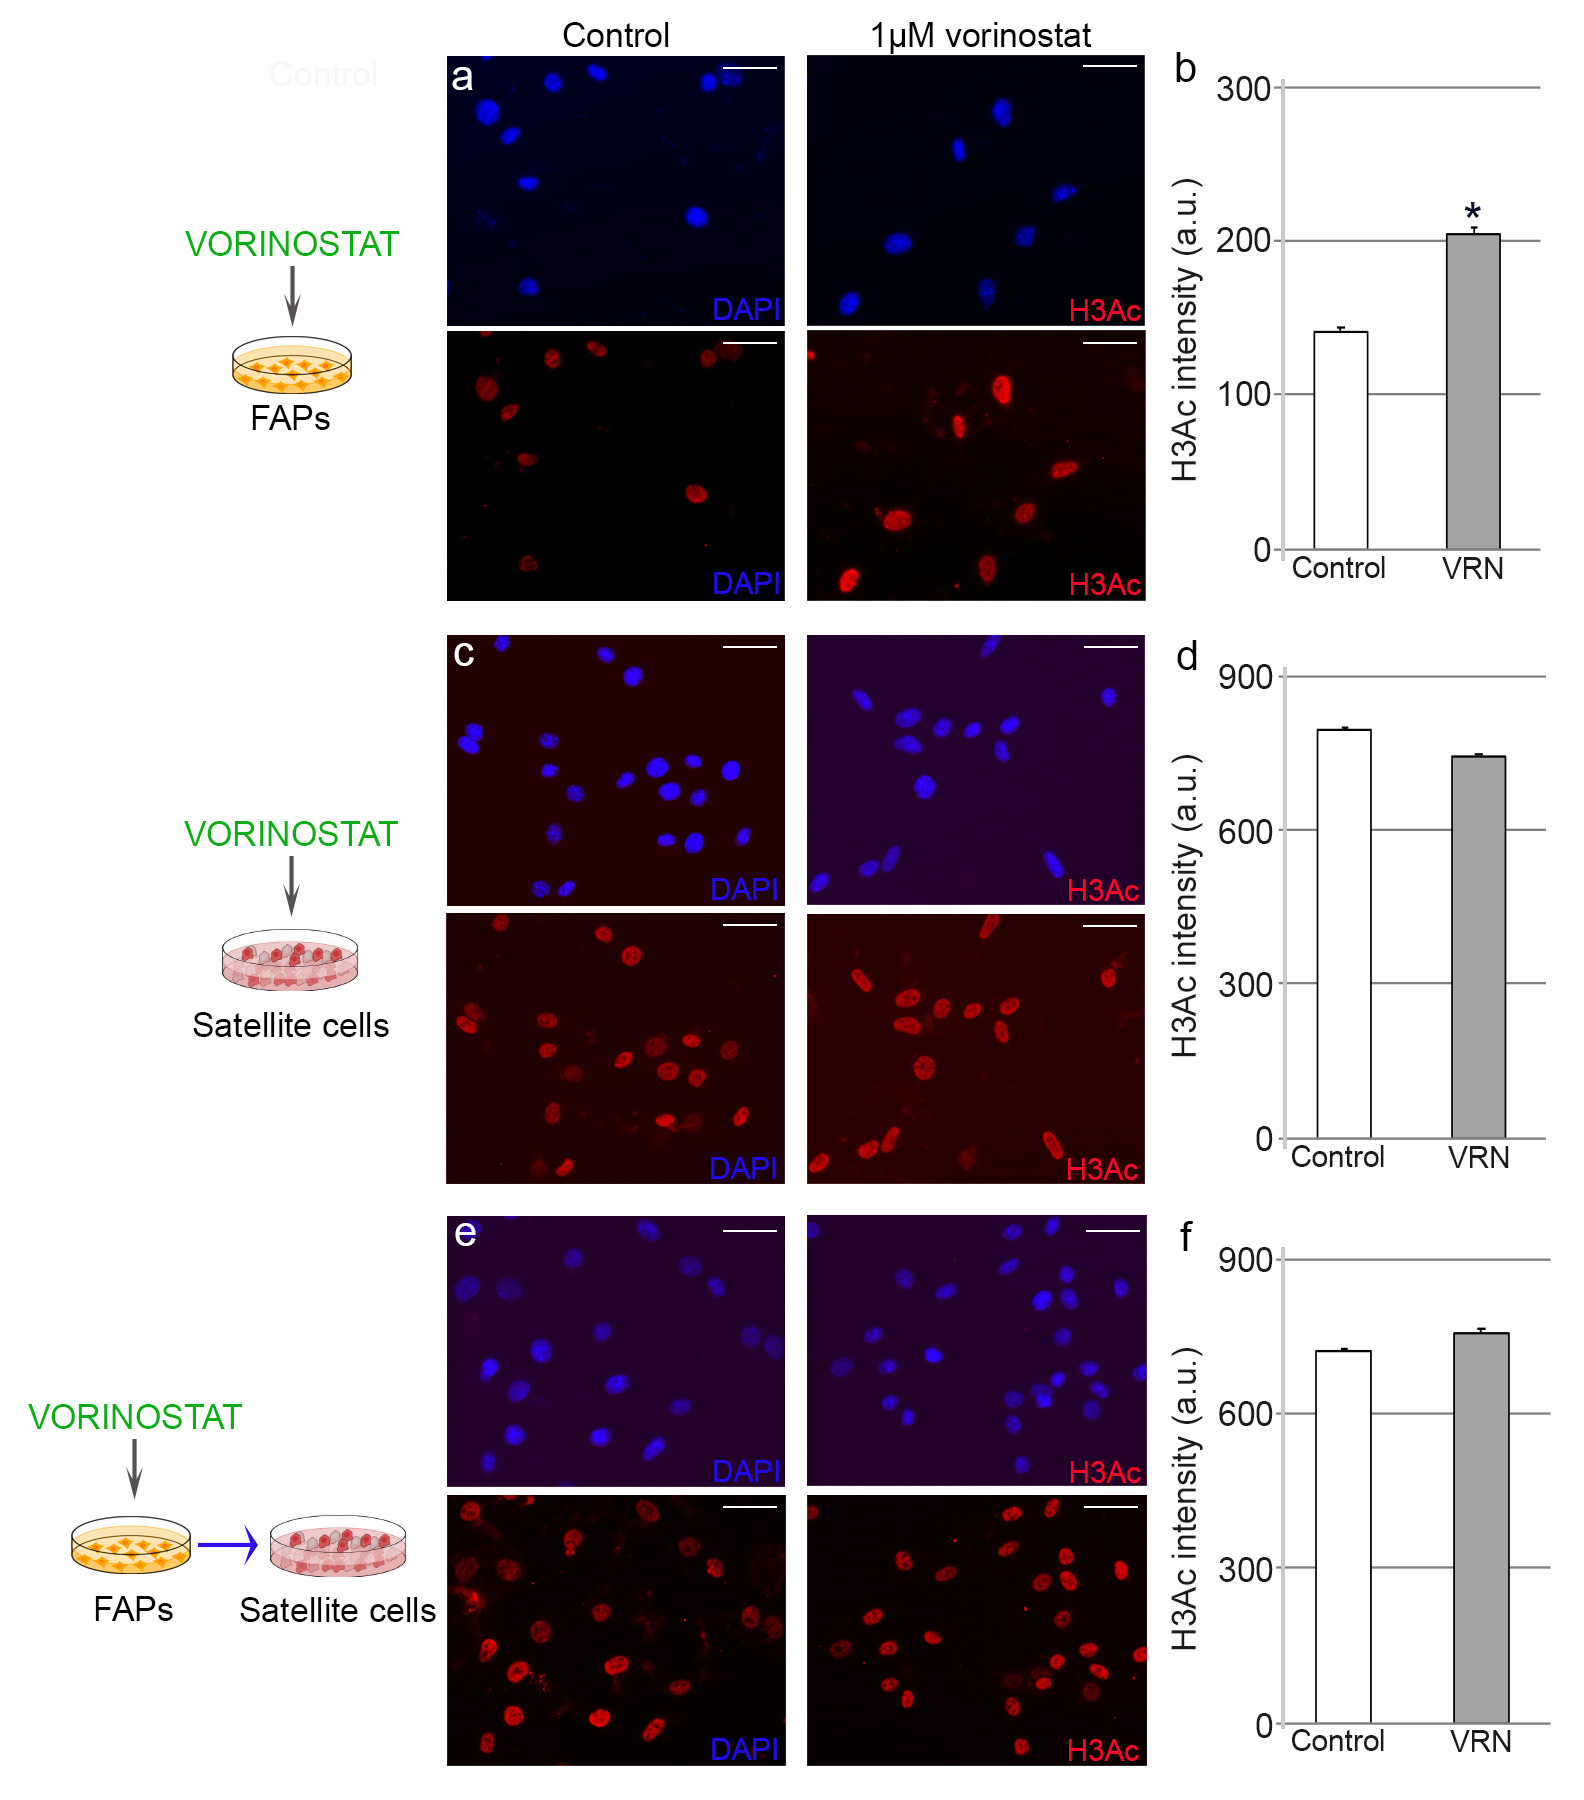 Fig. 3 
            Vorinostat modifies histone acetylation levels in fibro-adipogenic progenitors (FAPs). Representative images of a) FAPs and c) and e) satellite cells from control and vorinostat-treated groups immunostained for histone 3 acetylation (H3Ac) after the a) and c) direct or e) indirect addition of the histone deacetylase inhibitor. Graphs in b), d), and f) show the mean H3Ac intensity accumulated in the cells. 4',6-diamidino-2-phenylindole (DAPI) was used to identify all nuclei. Scale bar, 10 μm. Numerical data were expressed as the mean and standard error of the mean of at least three independent experiments. *Significance between experimental groups where p < 0.05, Shapiro Wilk and Mann-Whitney U tests. a.u., arbitrary units; VRN, vorinostat.
          